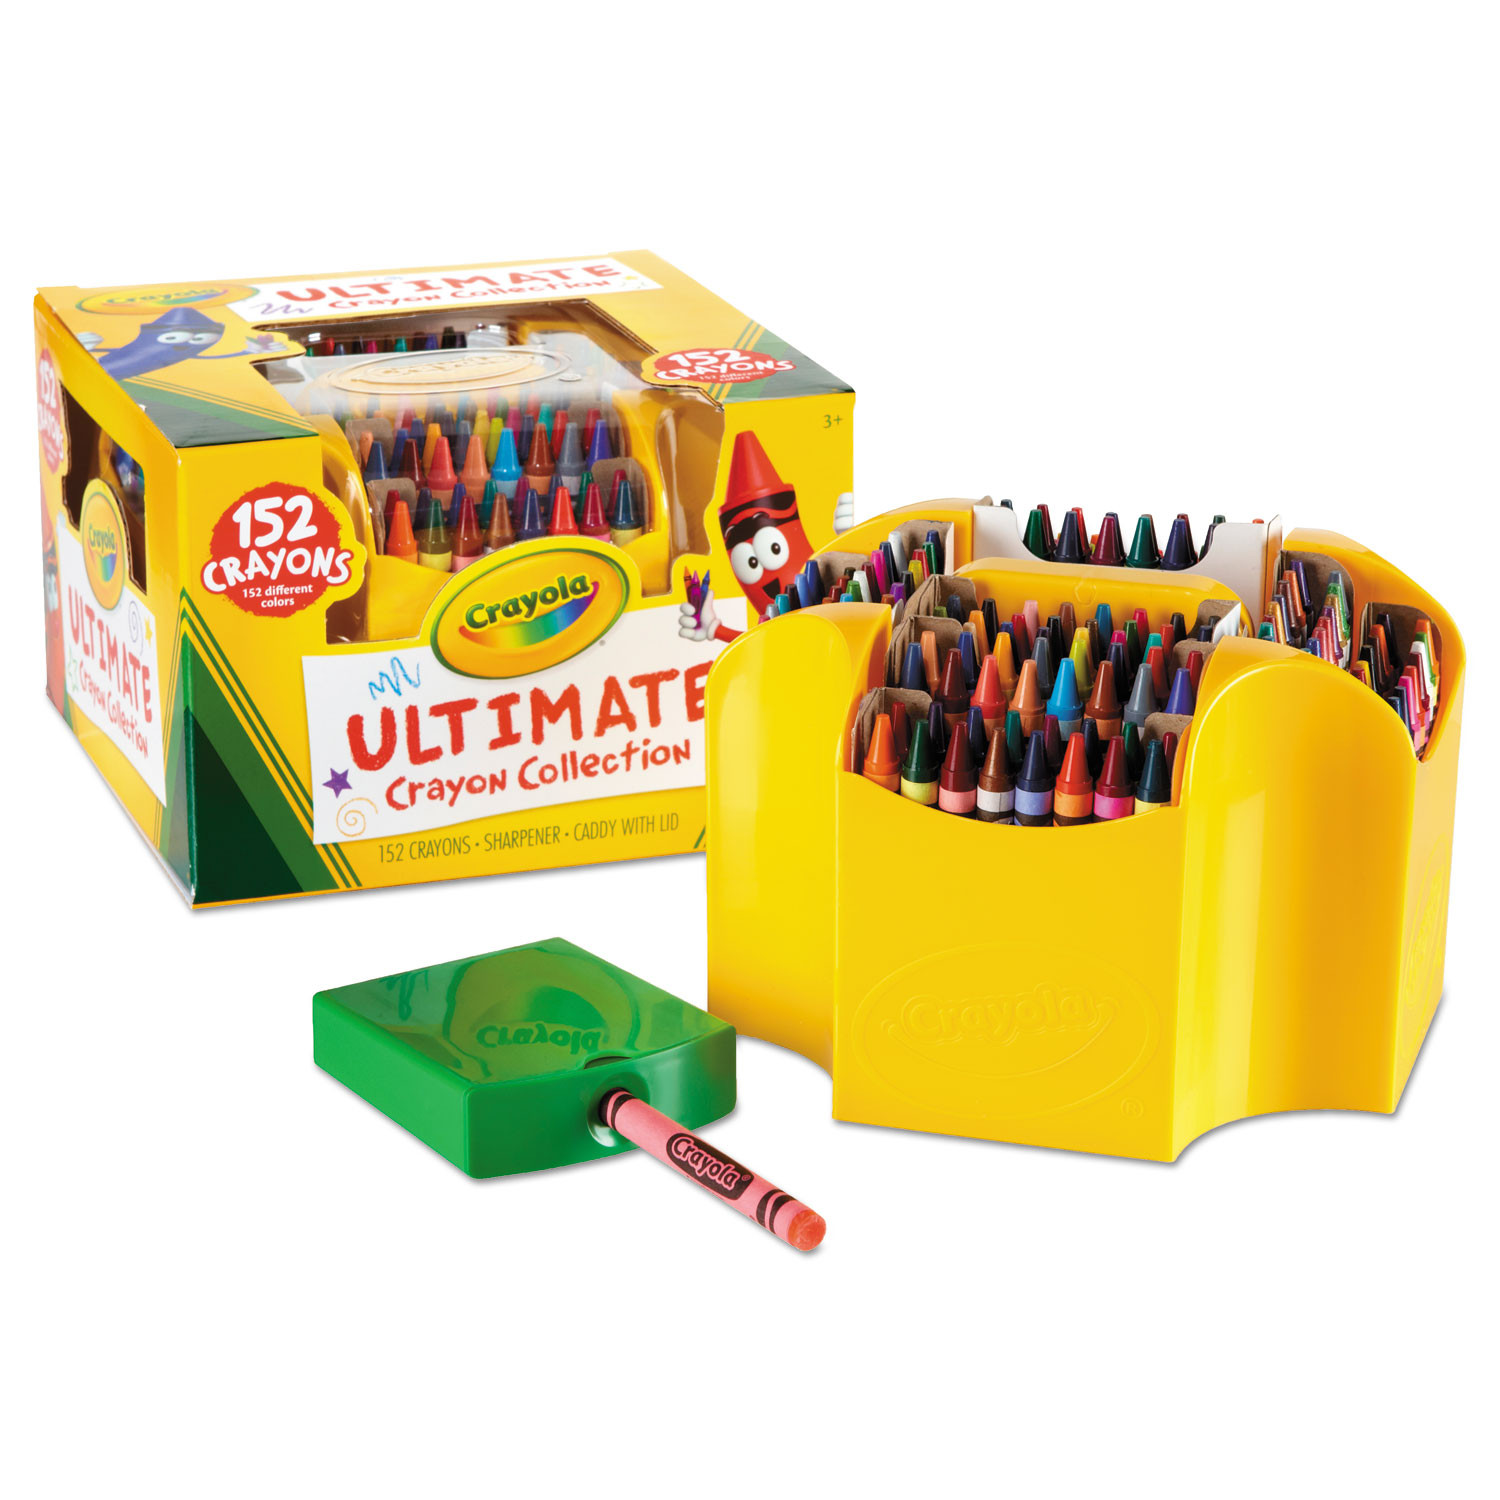 Hoffmaster 120816 Crayons, Triangular, Packaged, Blue - Green - Red - Yellow, Price/case/1440ct